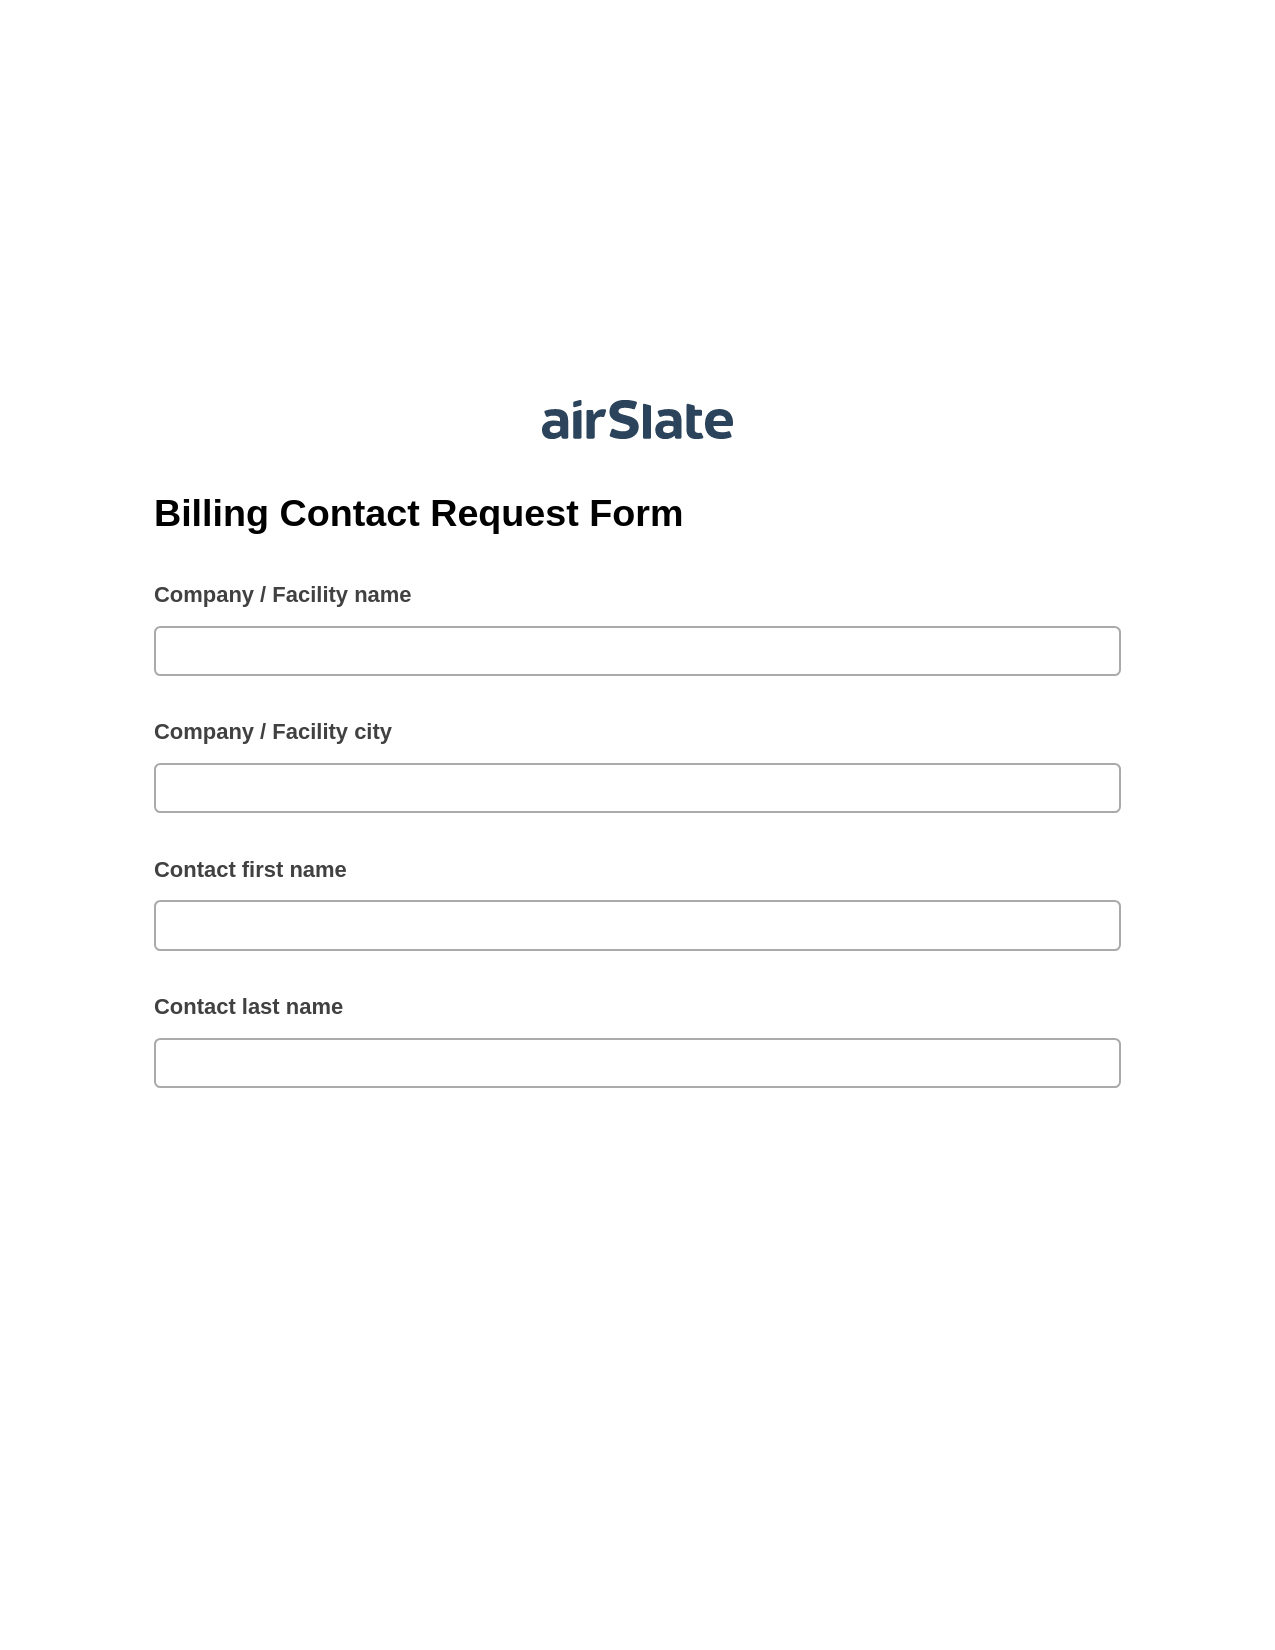 Multirole Billing Contact Request Form Pre-fill from Salesforce Records with SOQL Bot, Invoke Salesforce Process Bot, Slack Two-Way Binding Bot